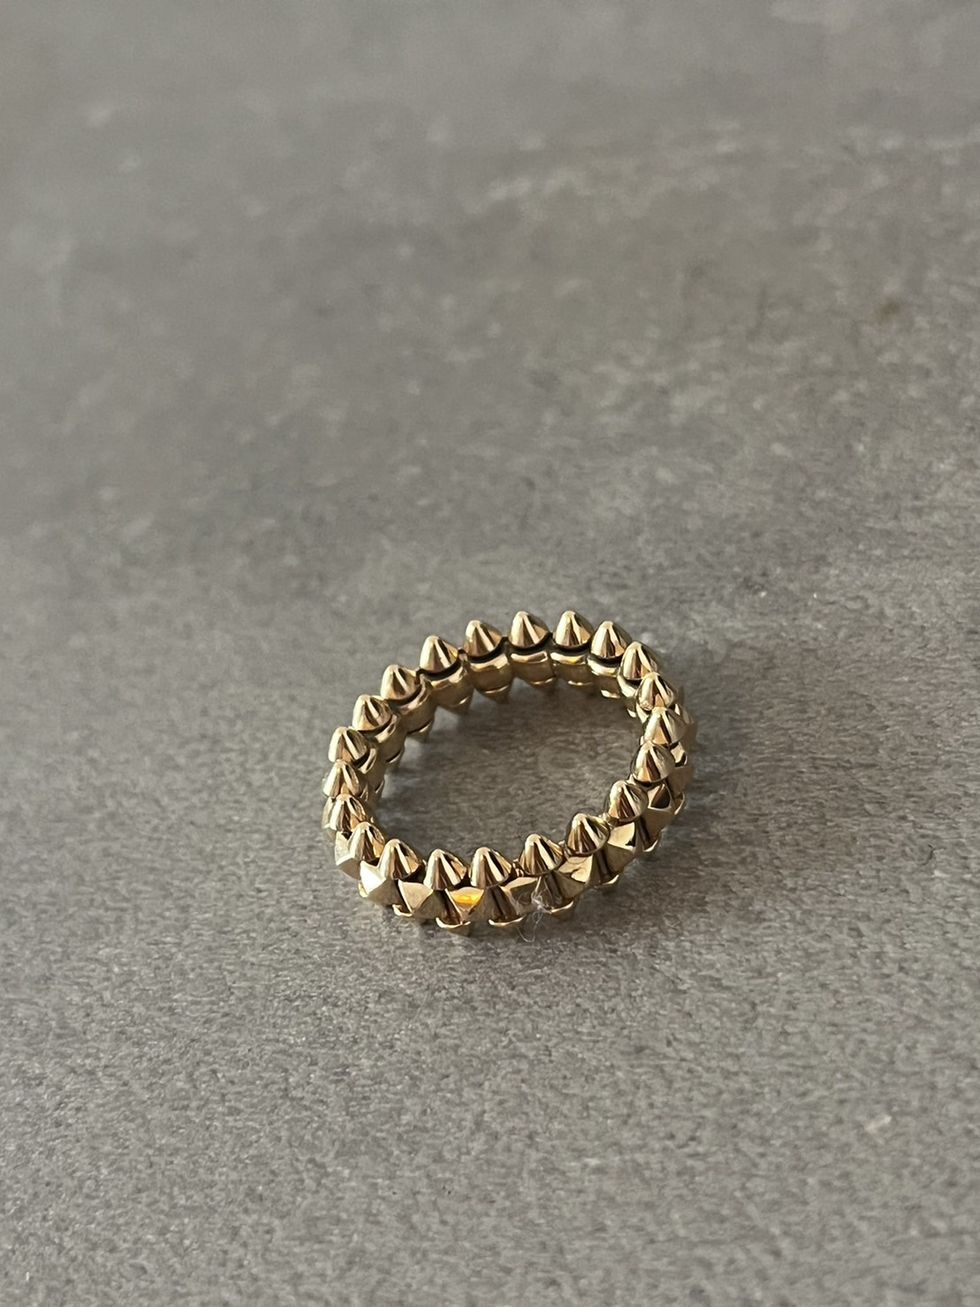 a gold ring on a grey surface